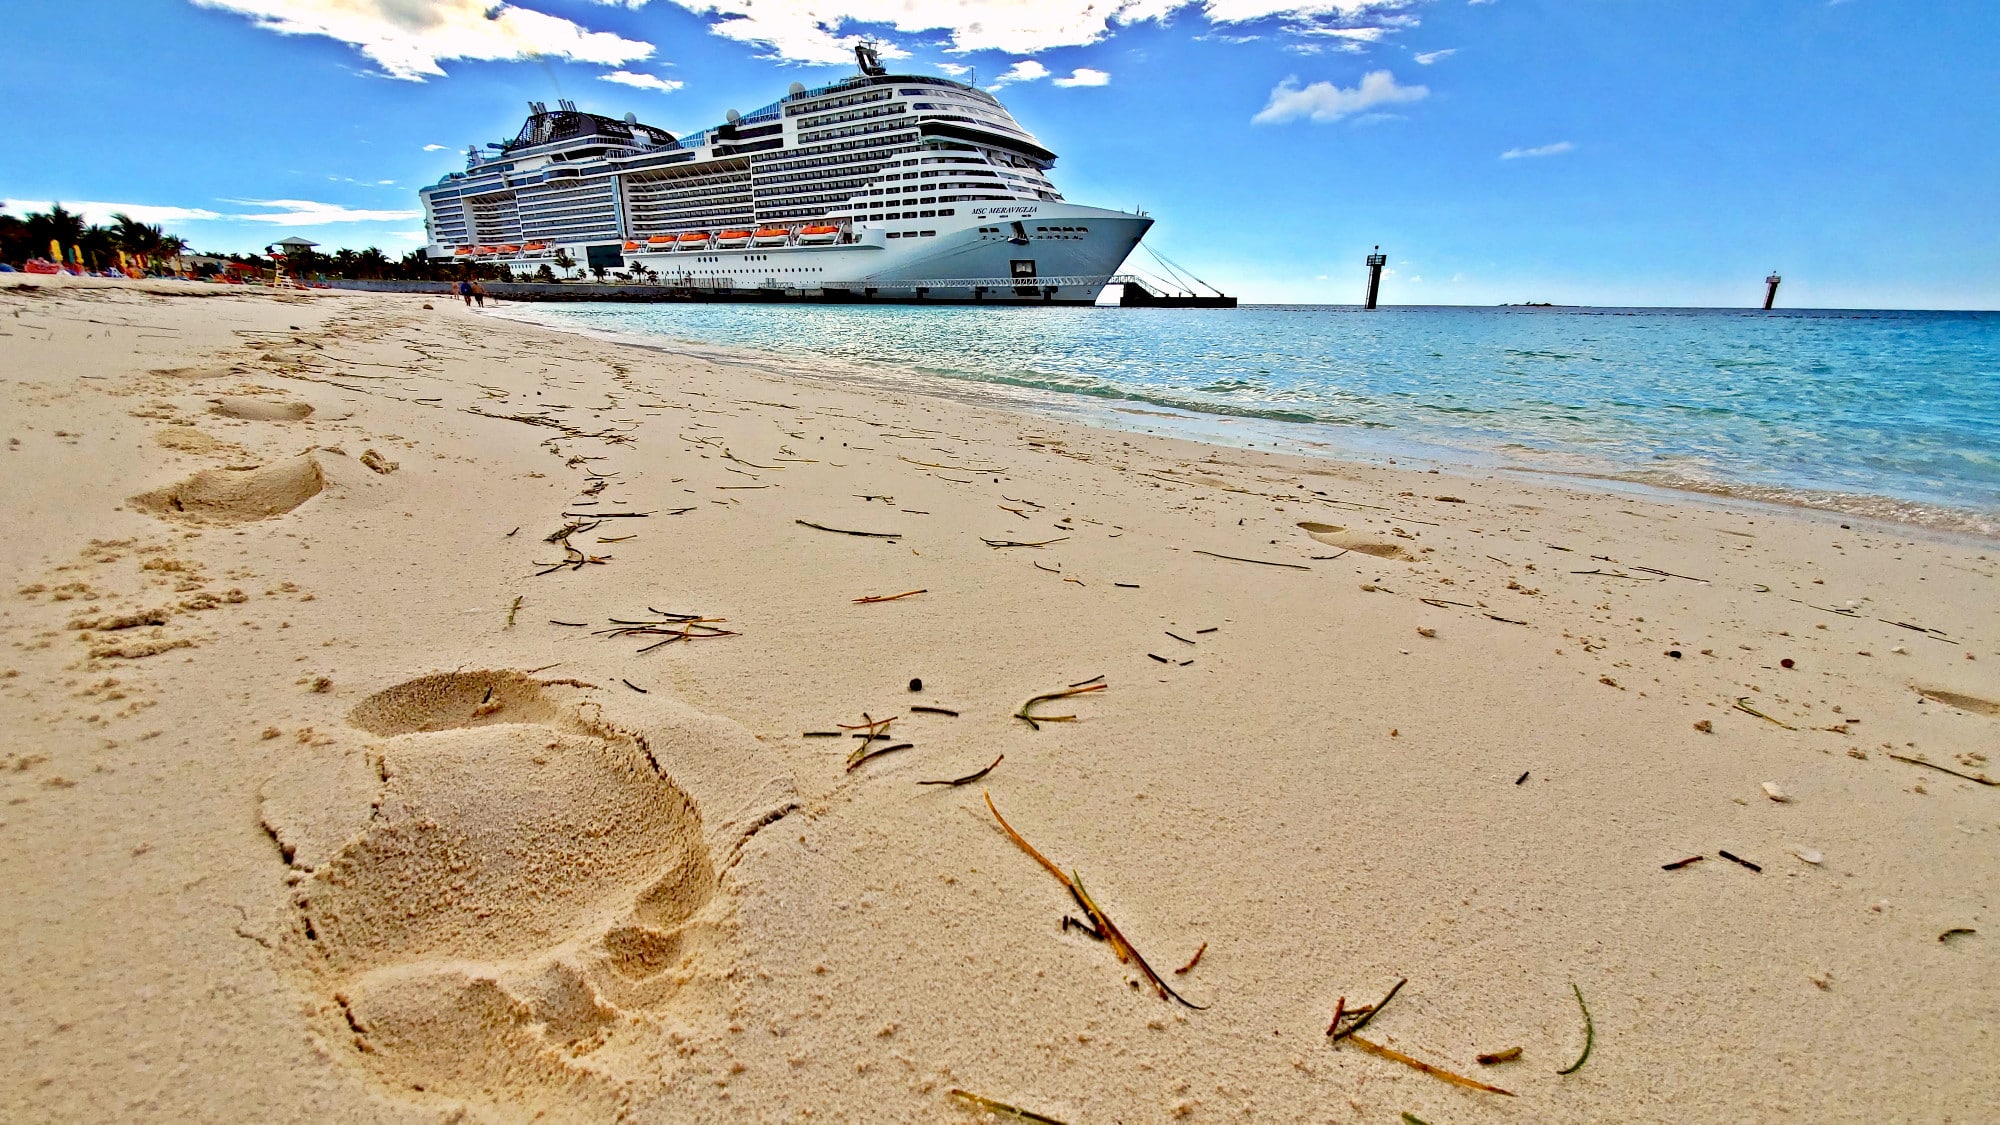 MSC Meraviglia at Ocean Cay private island with footprint in the sand at beach